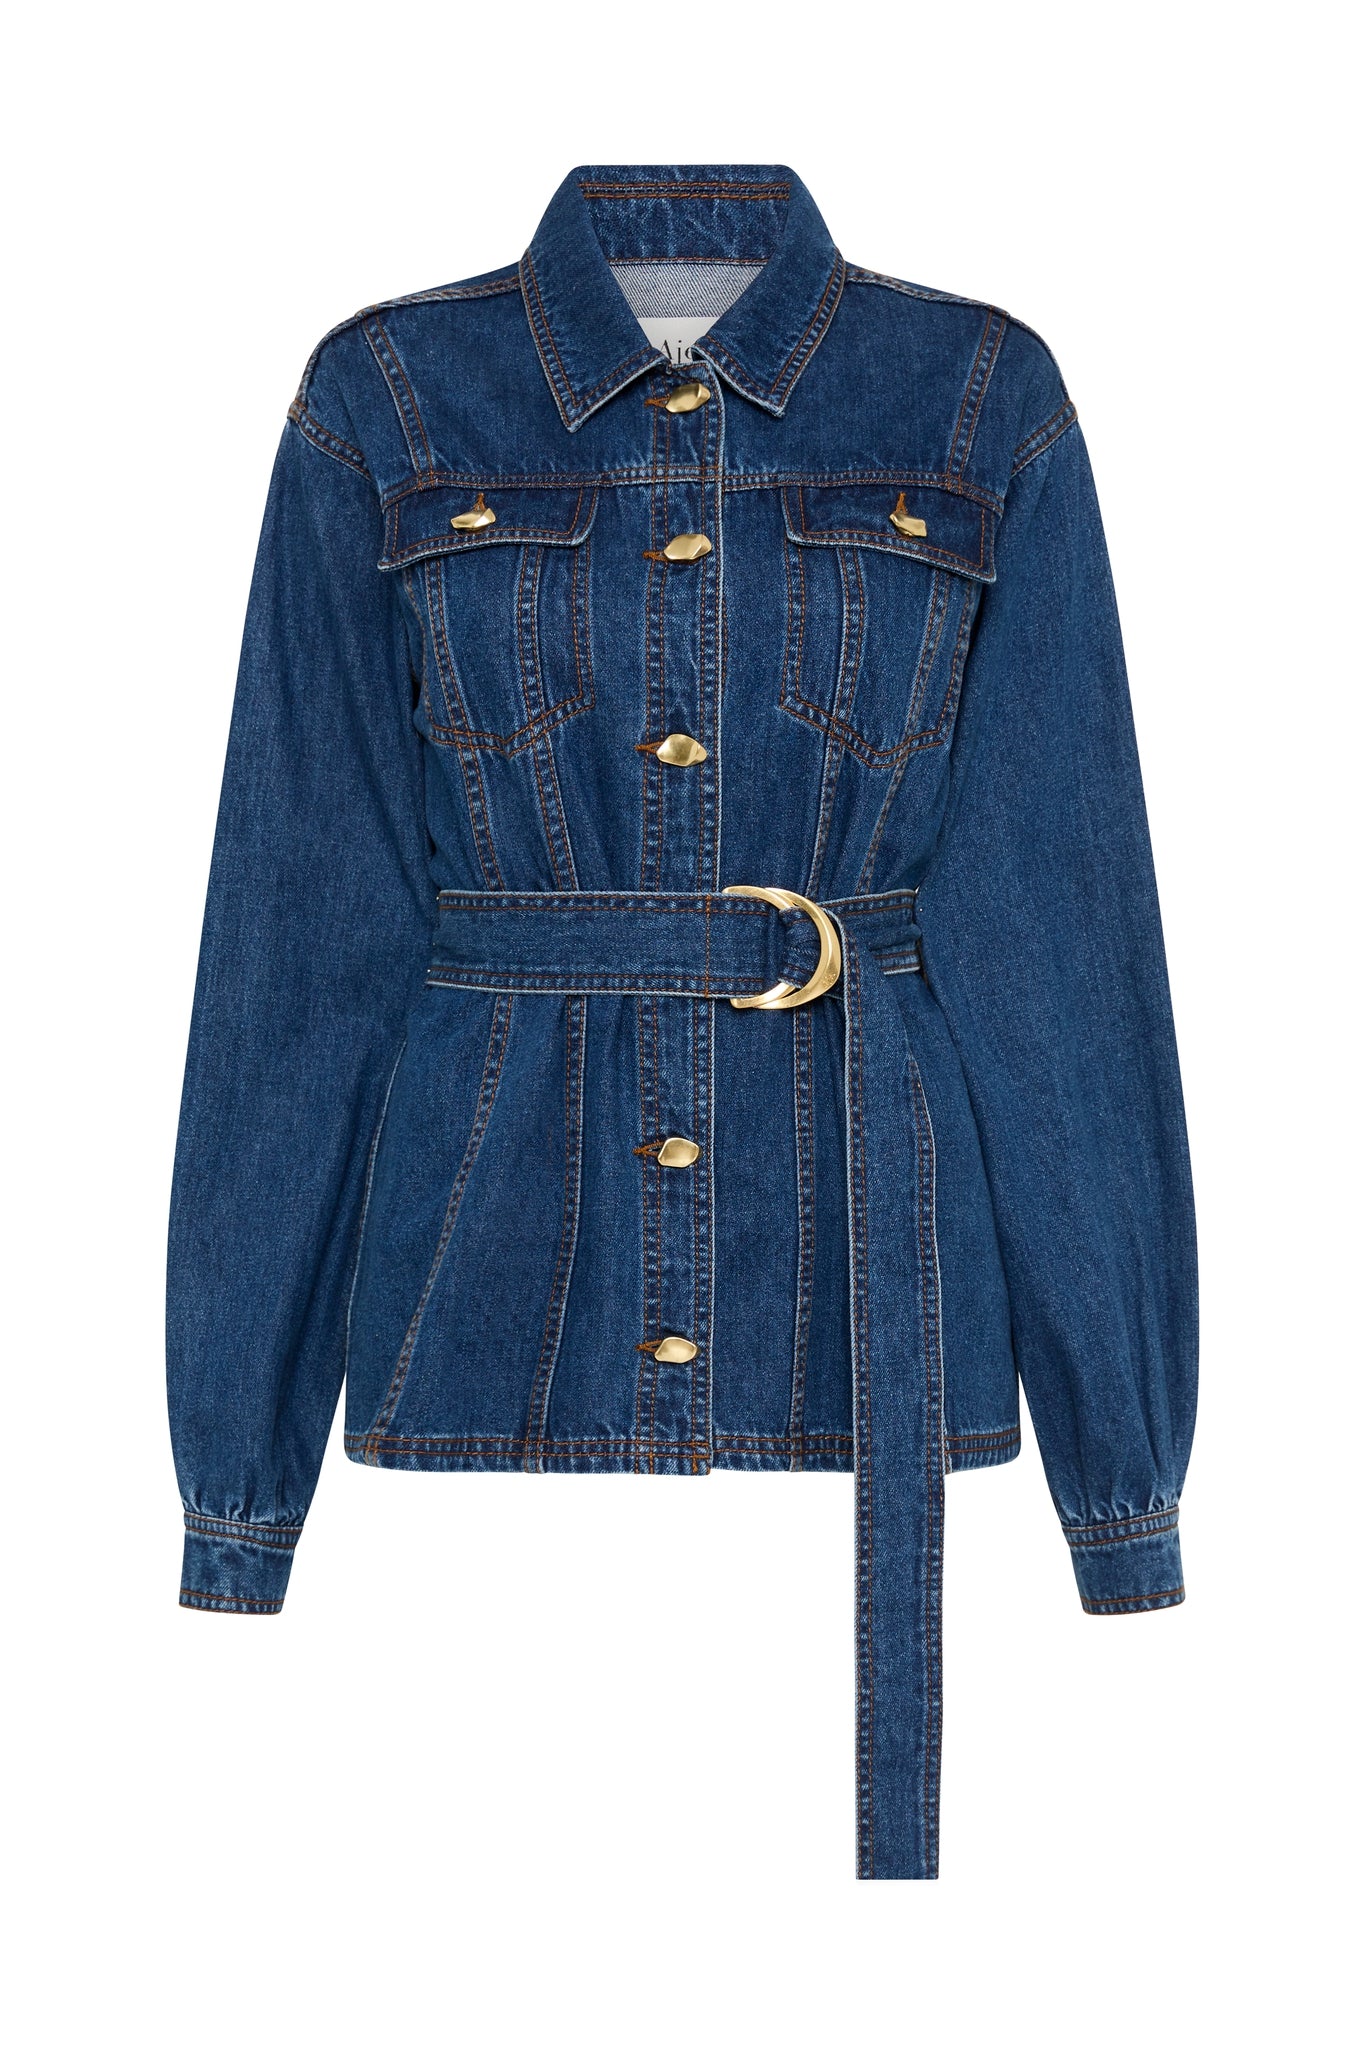 9 Ways to Style a Denim Shirt and Look Fabulous This Summer ...